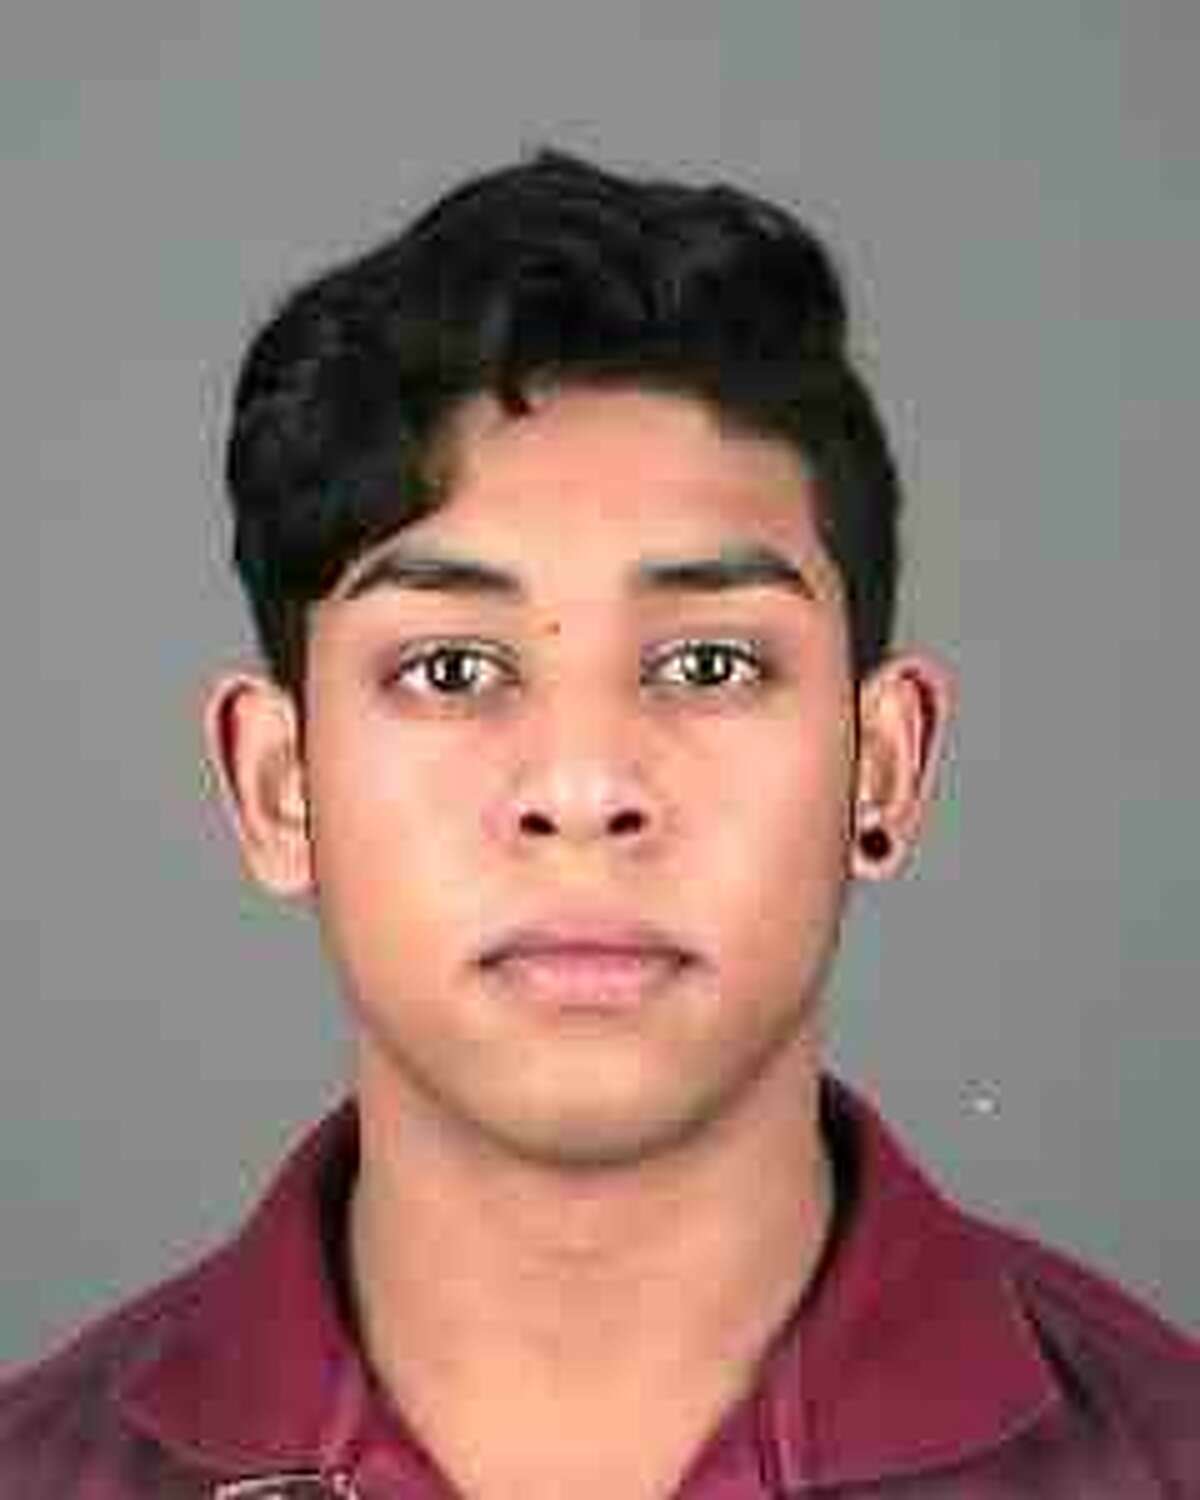 Austin Bacchus is charged with first-degree hazing, Oct. 30, 2015. (Albany Police photo)